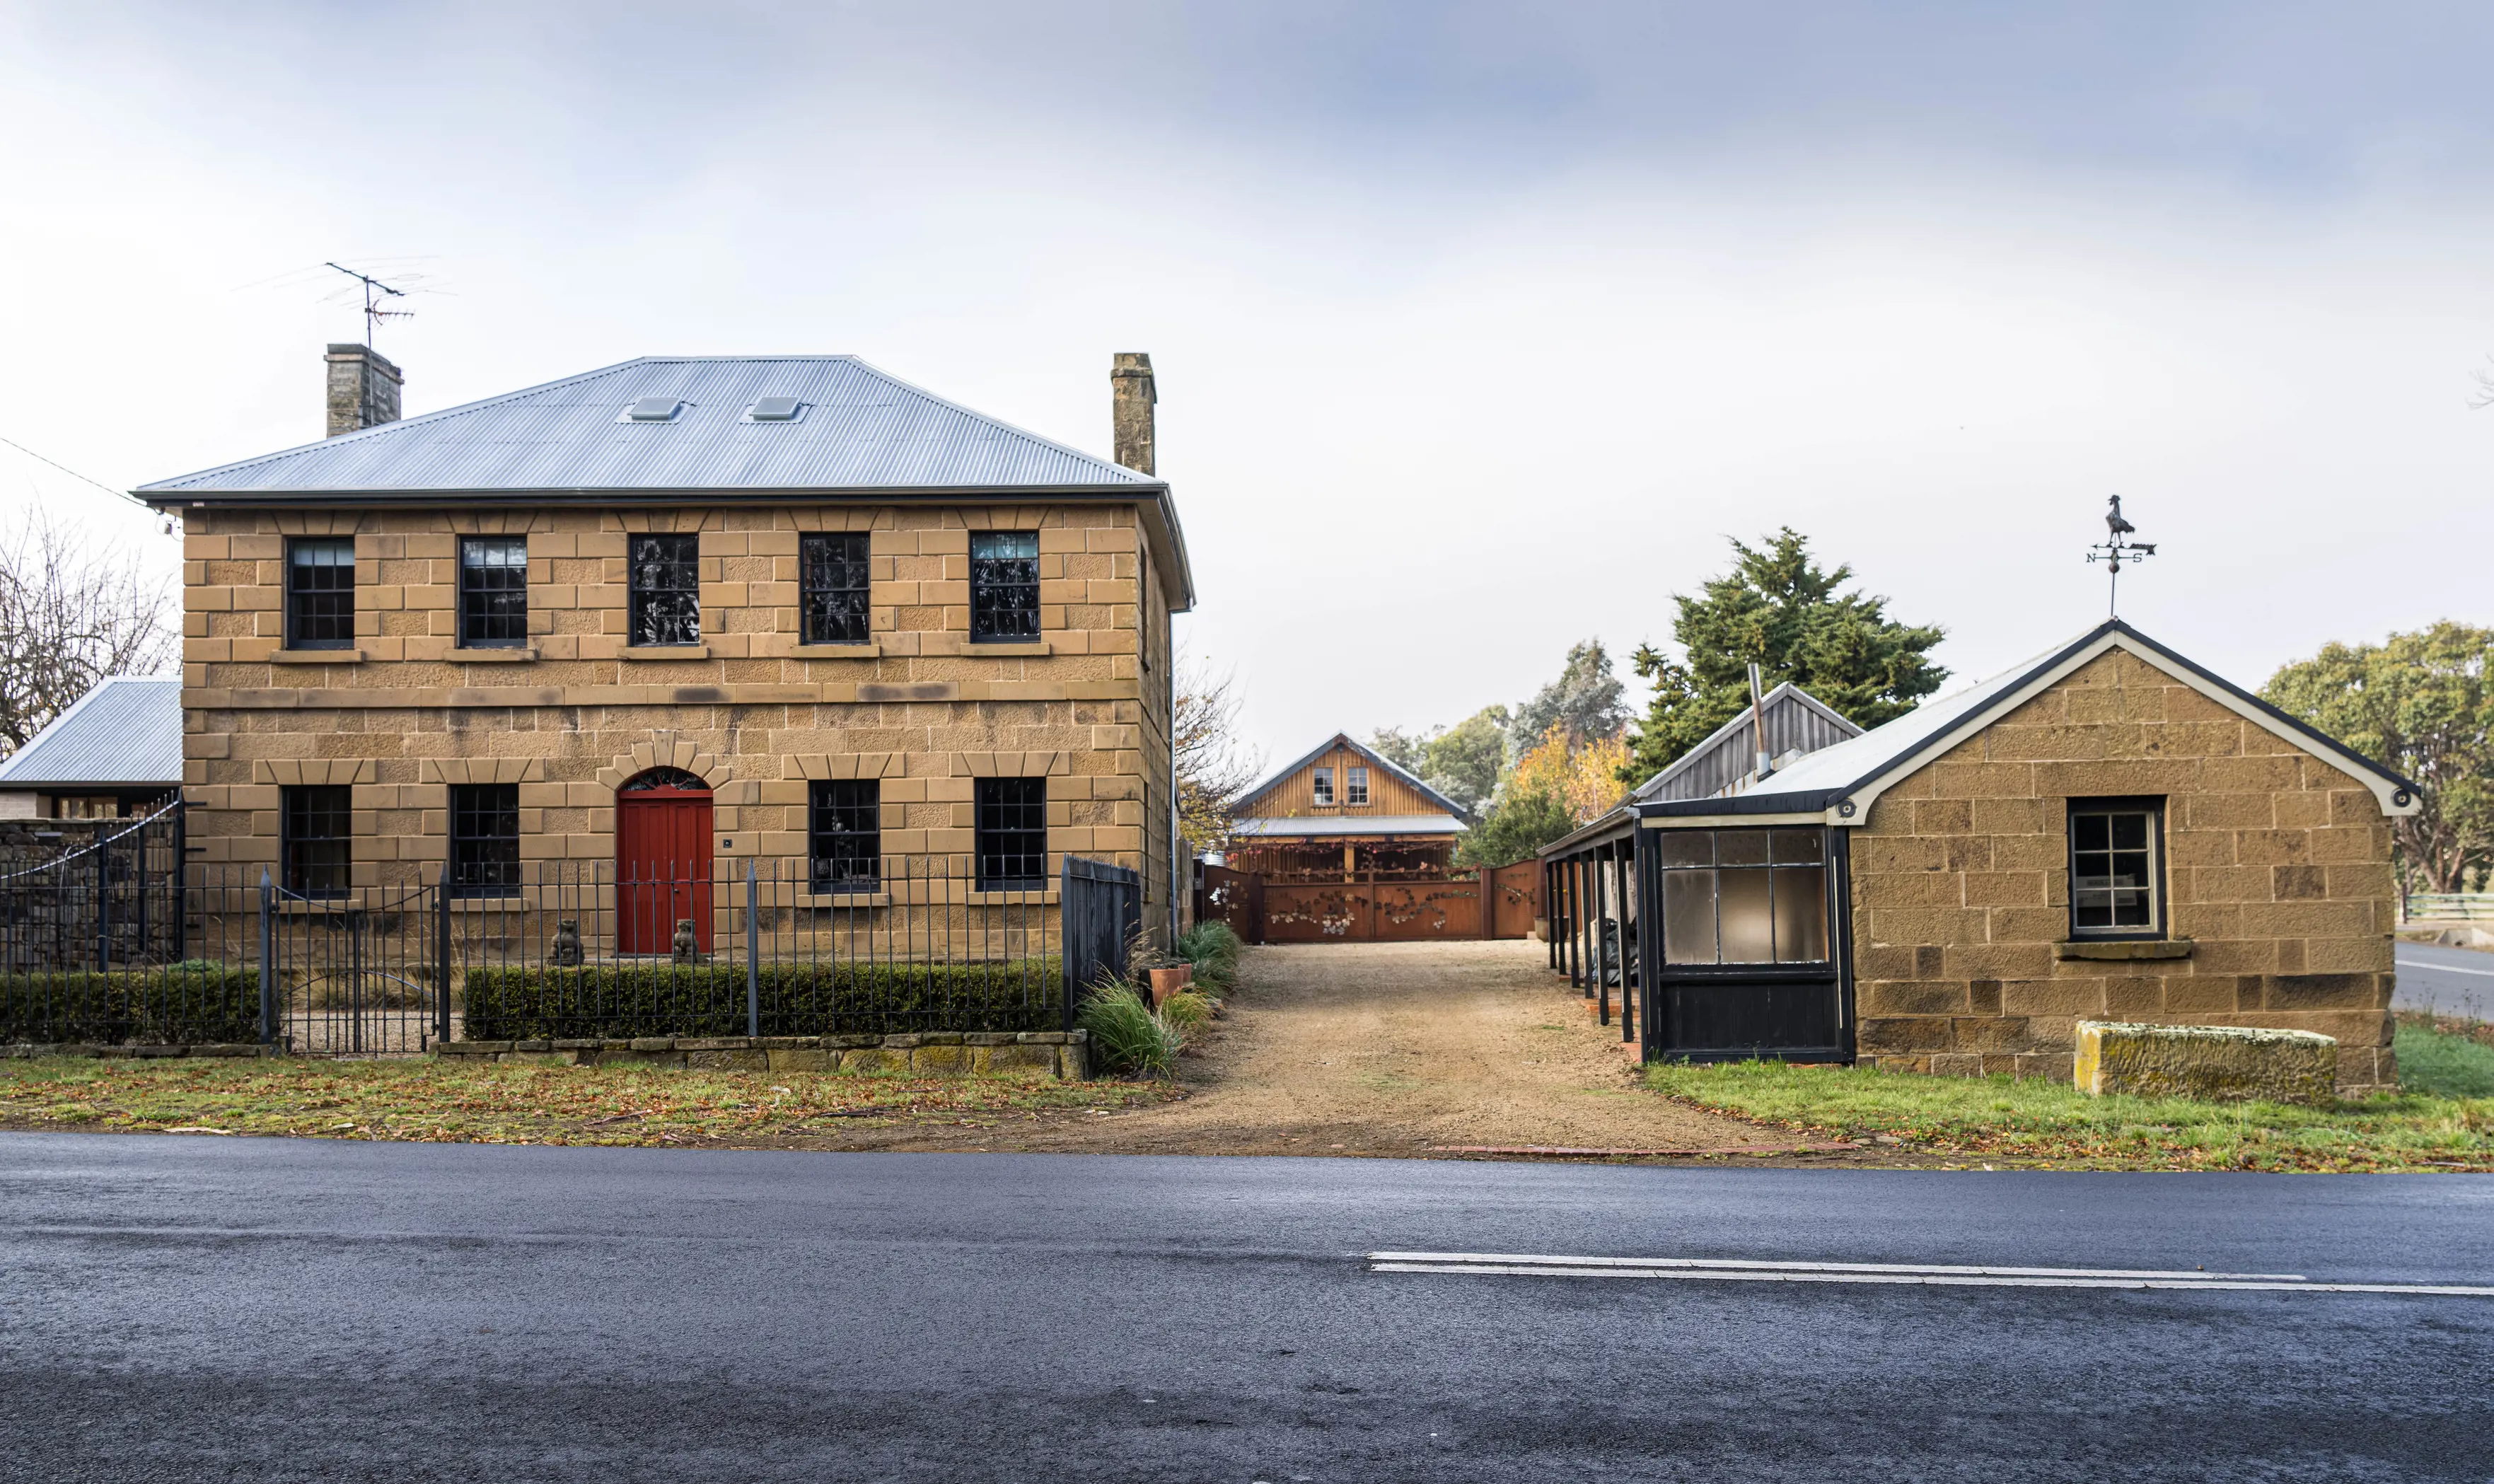 Stunning sandstone mansion with red door. Historic house and old Barn, Oatlands